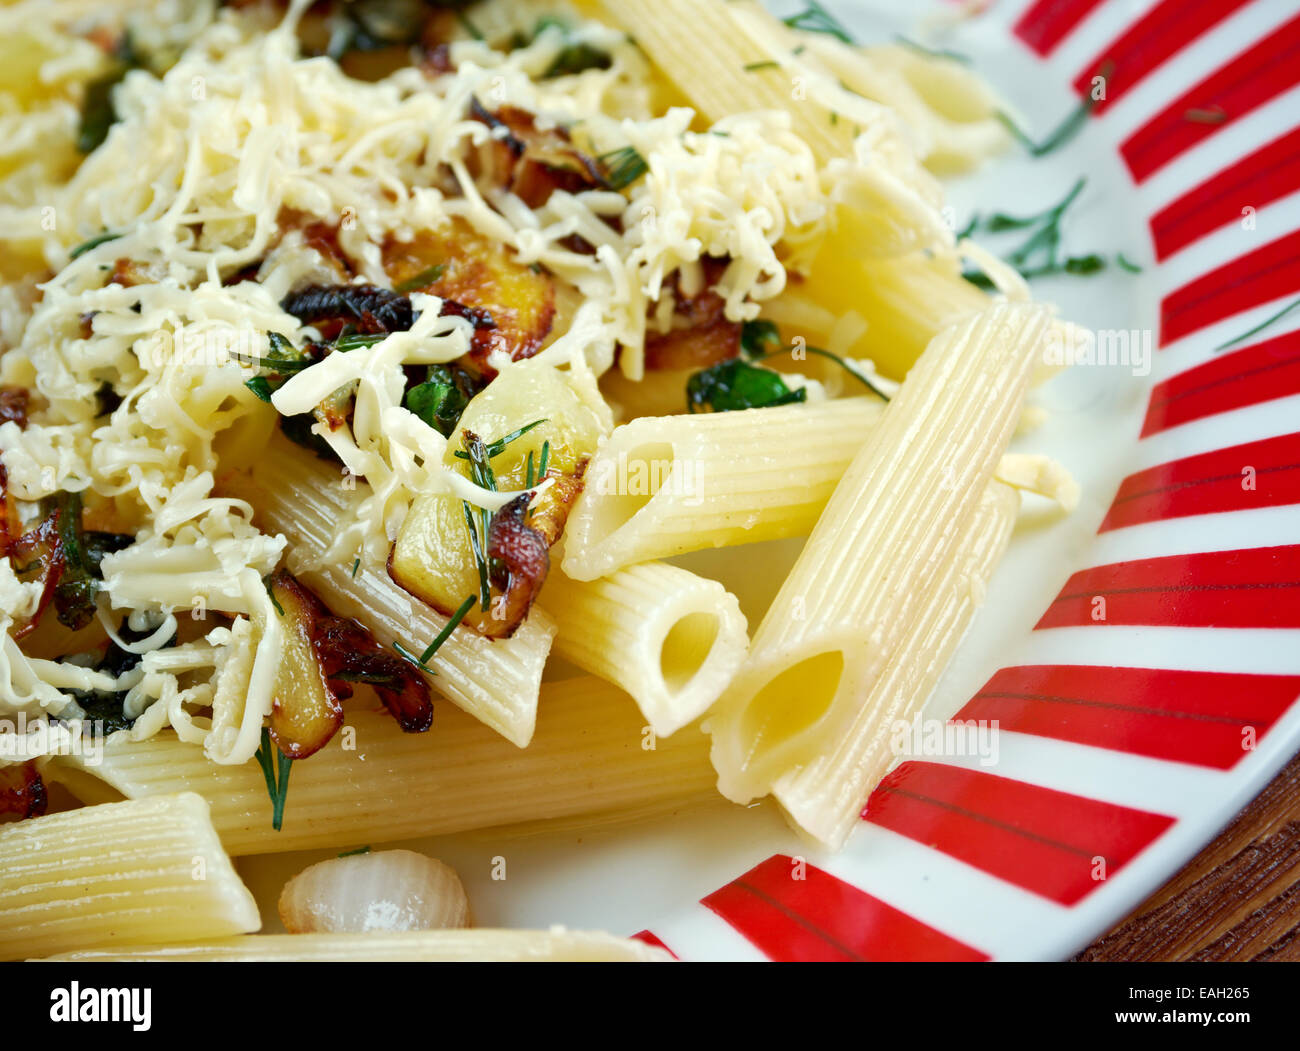 Mezze penne alla formaggella - Italian pasta penne with goat cheese and vegetables Stock Photo